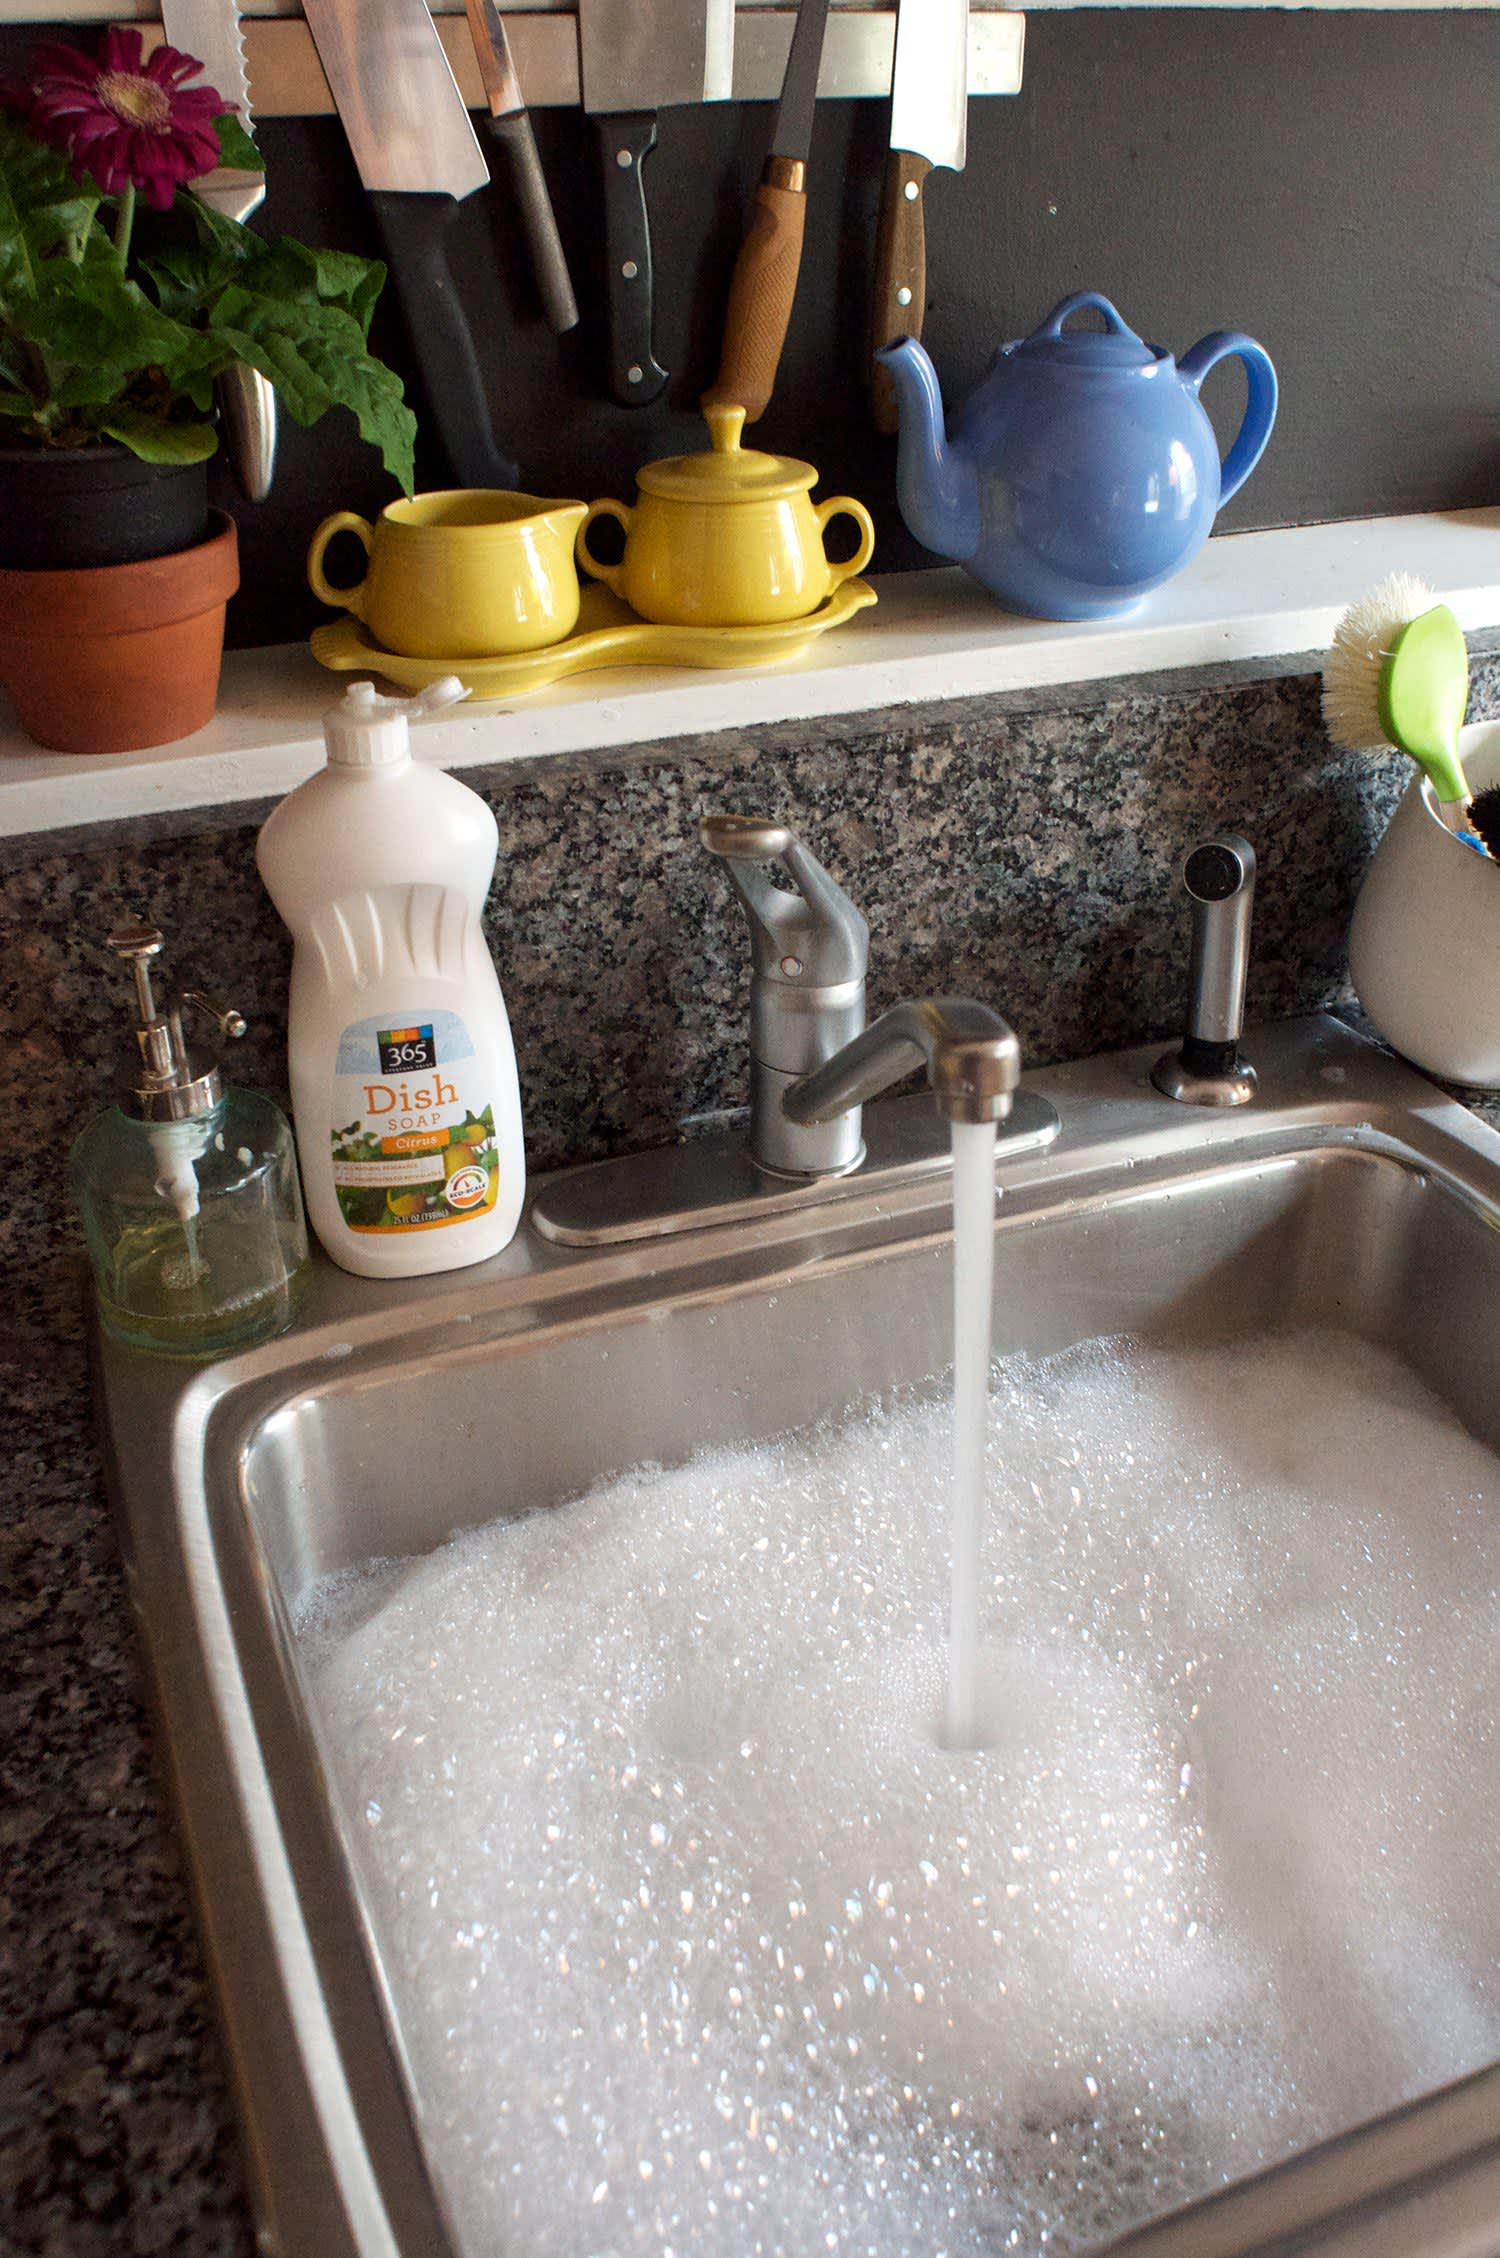 How To Squirt Dish Soap Into the Sink | Kitchn